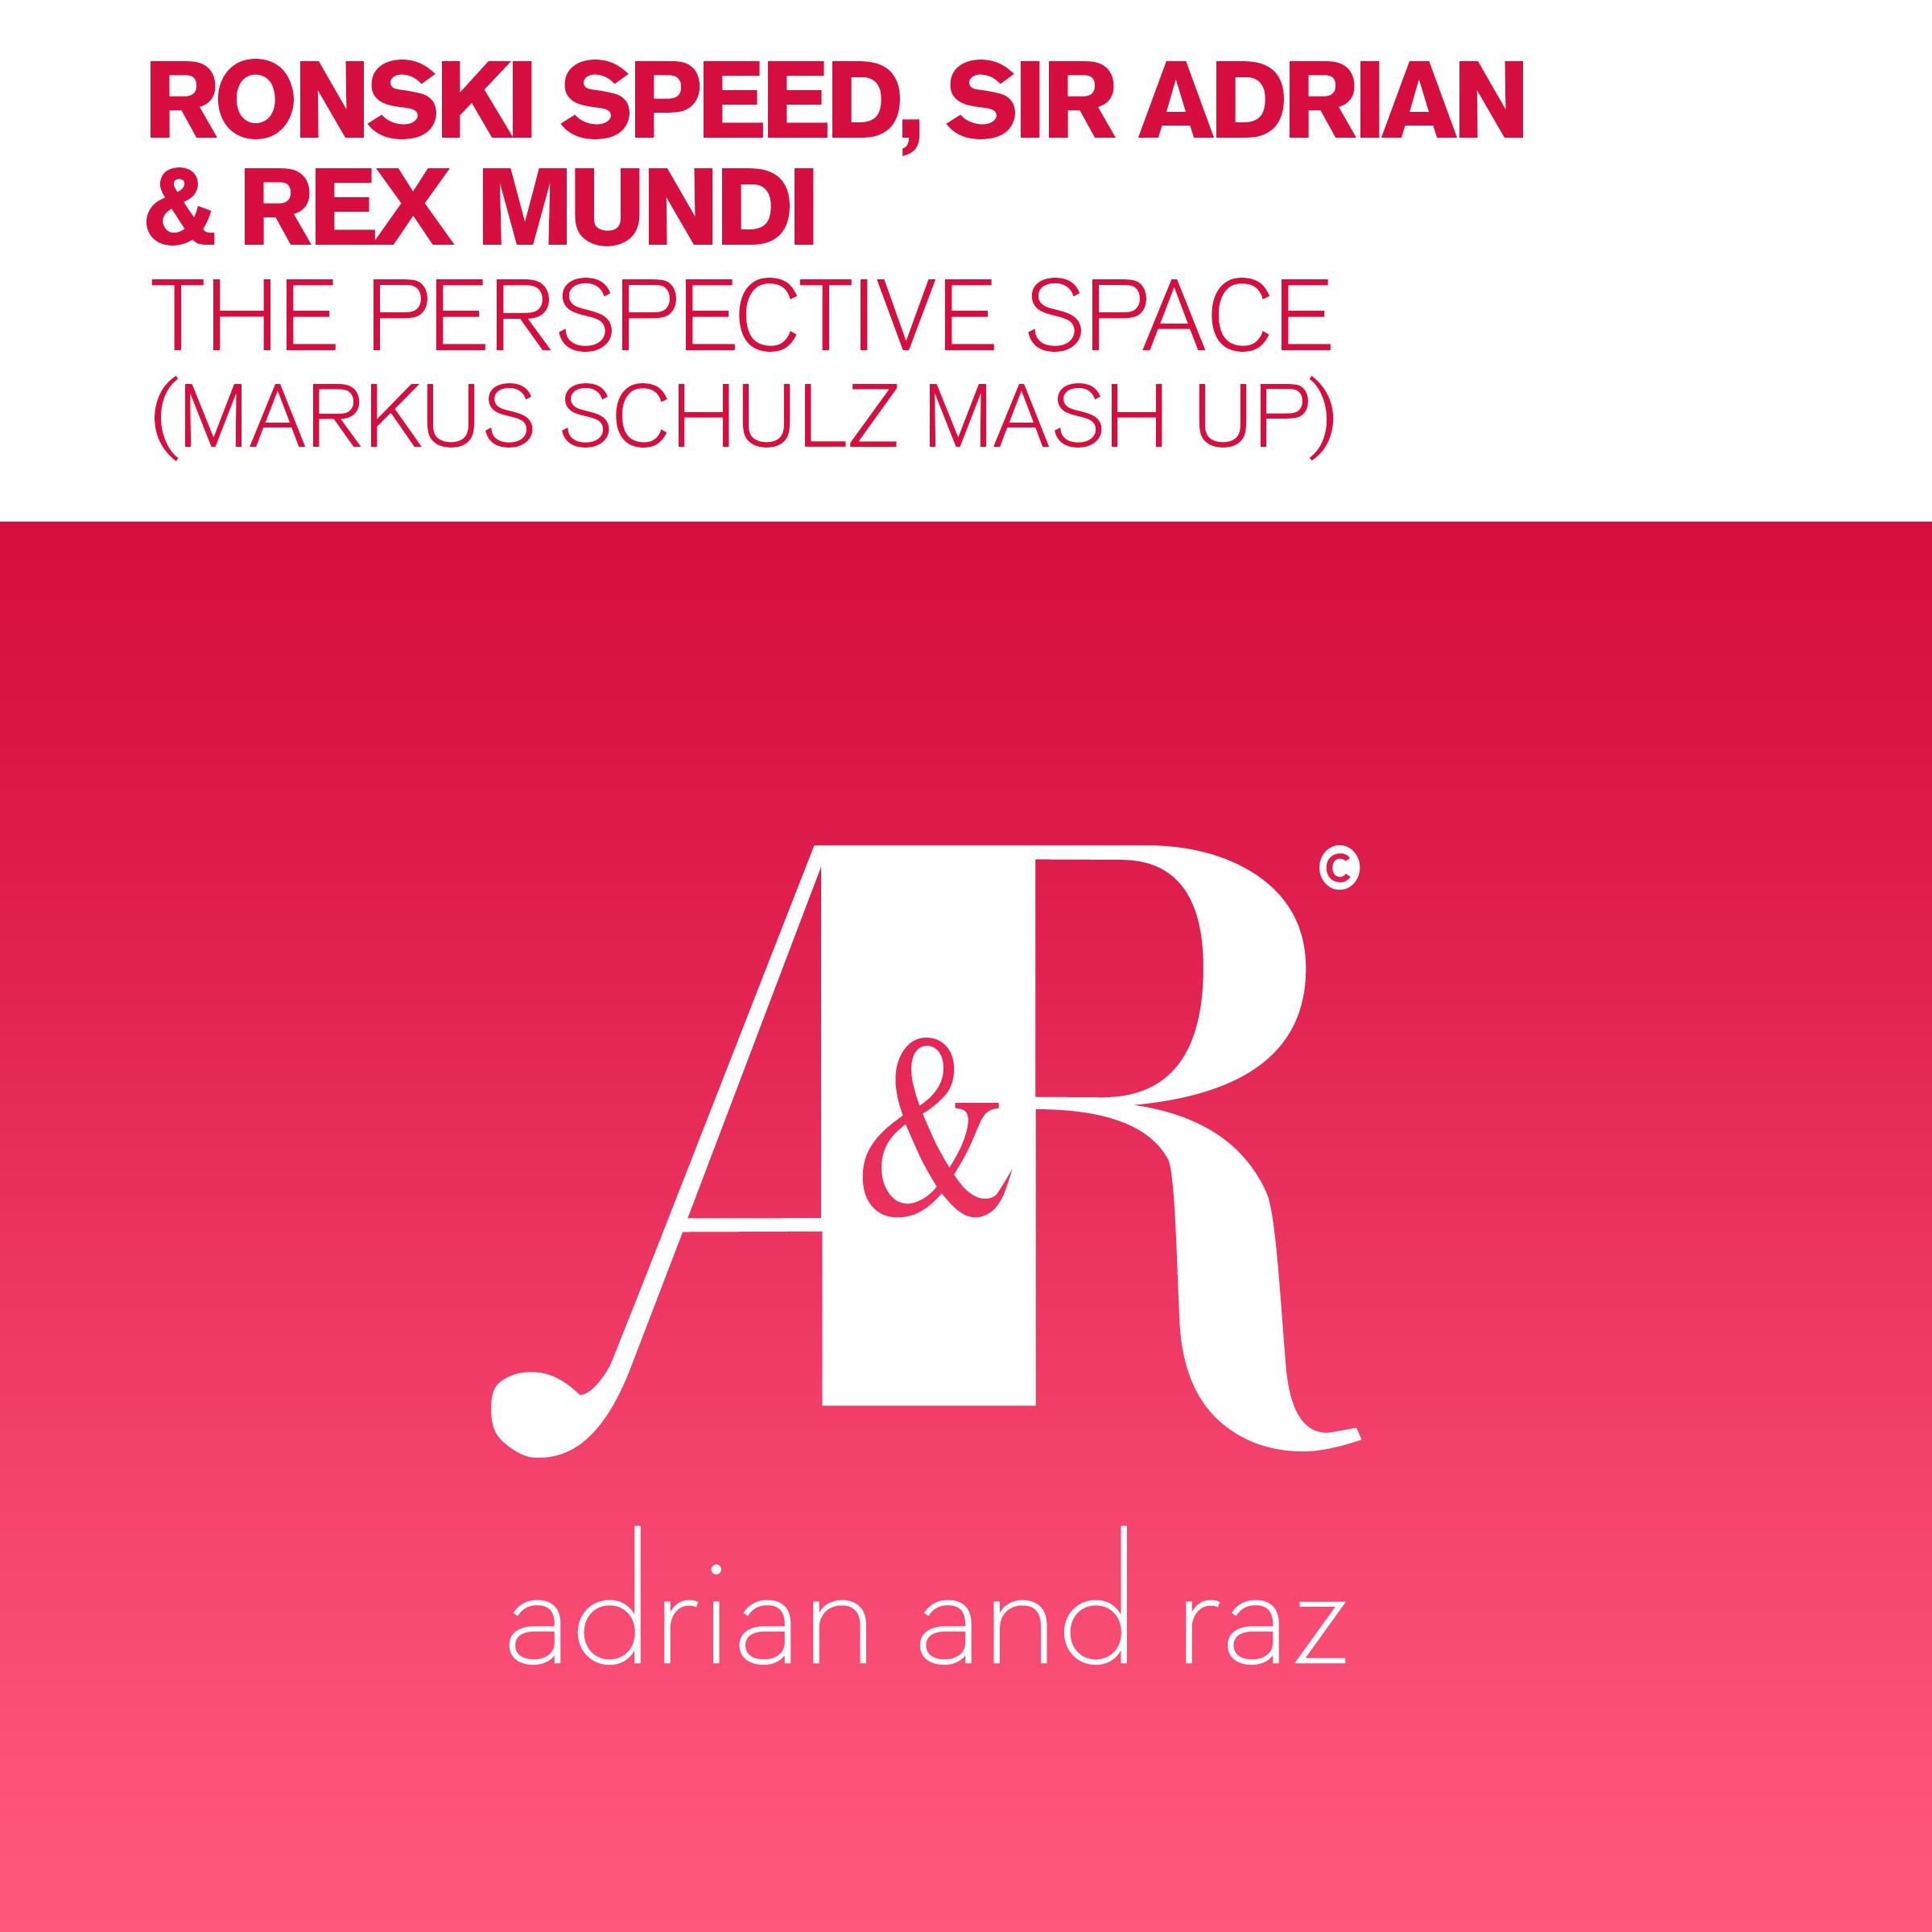 Ronski Speed - The Perspective Space (Markus Schulz Mash Up)